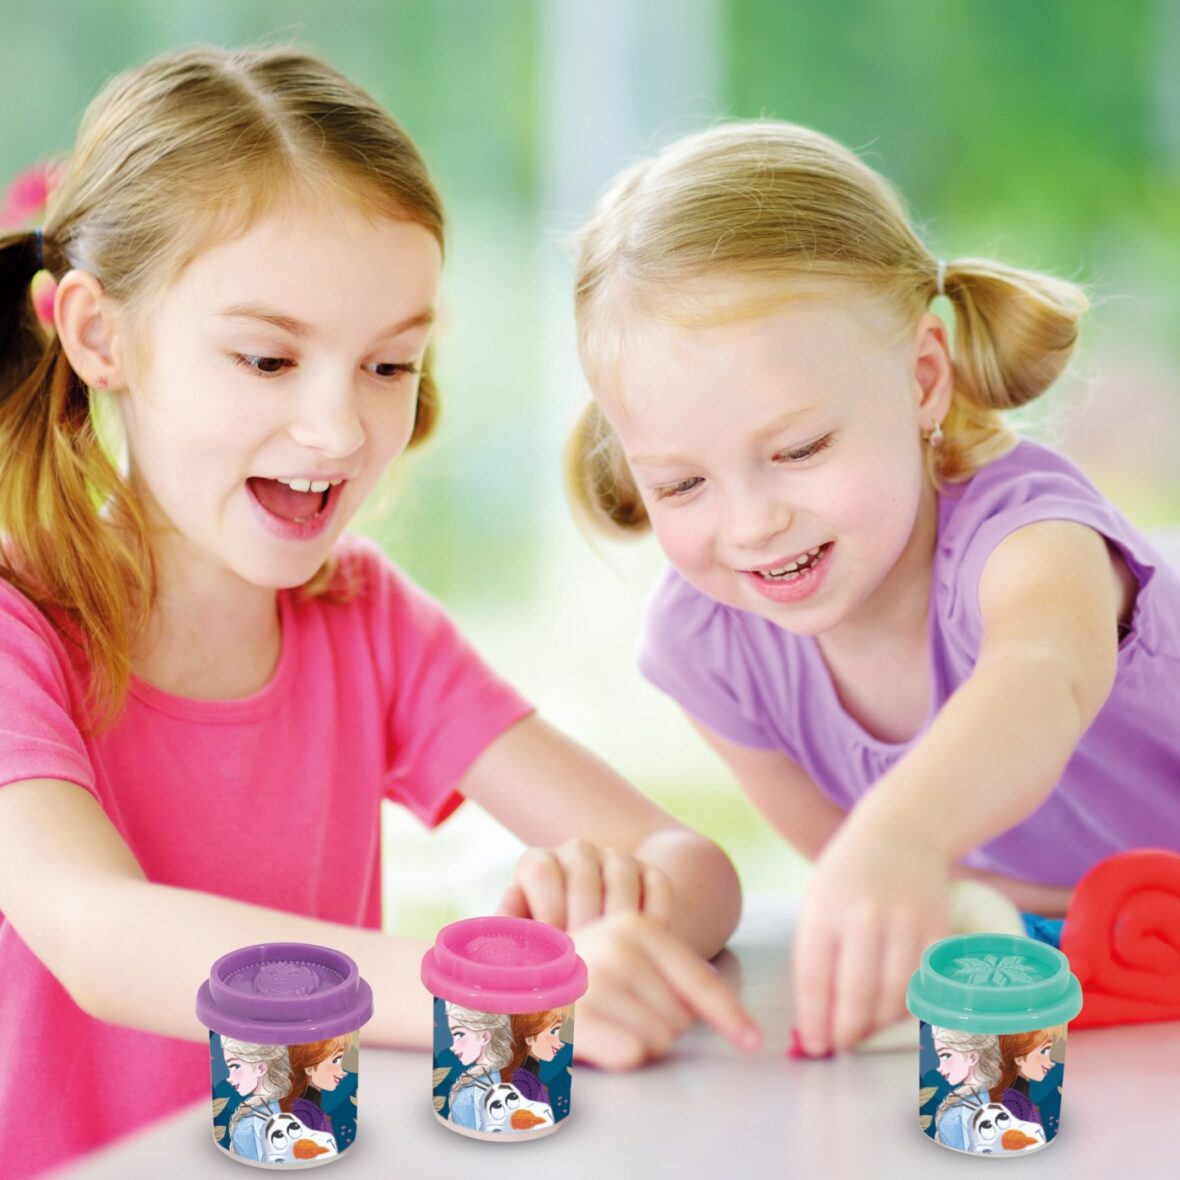 Two cute little sisters having fun together with modeling clay at a daycare. Creative kids molding at home. Children play with plasticine or dough.